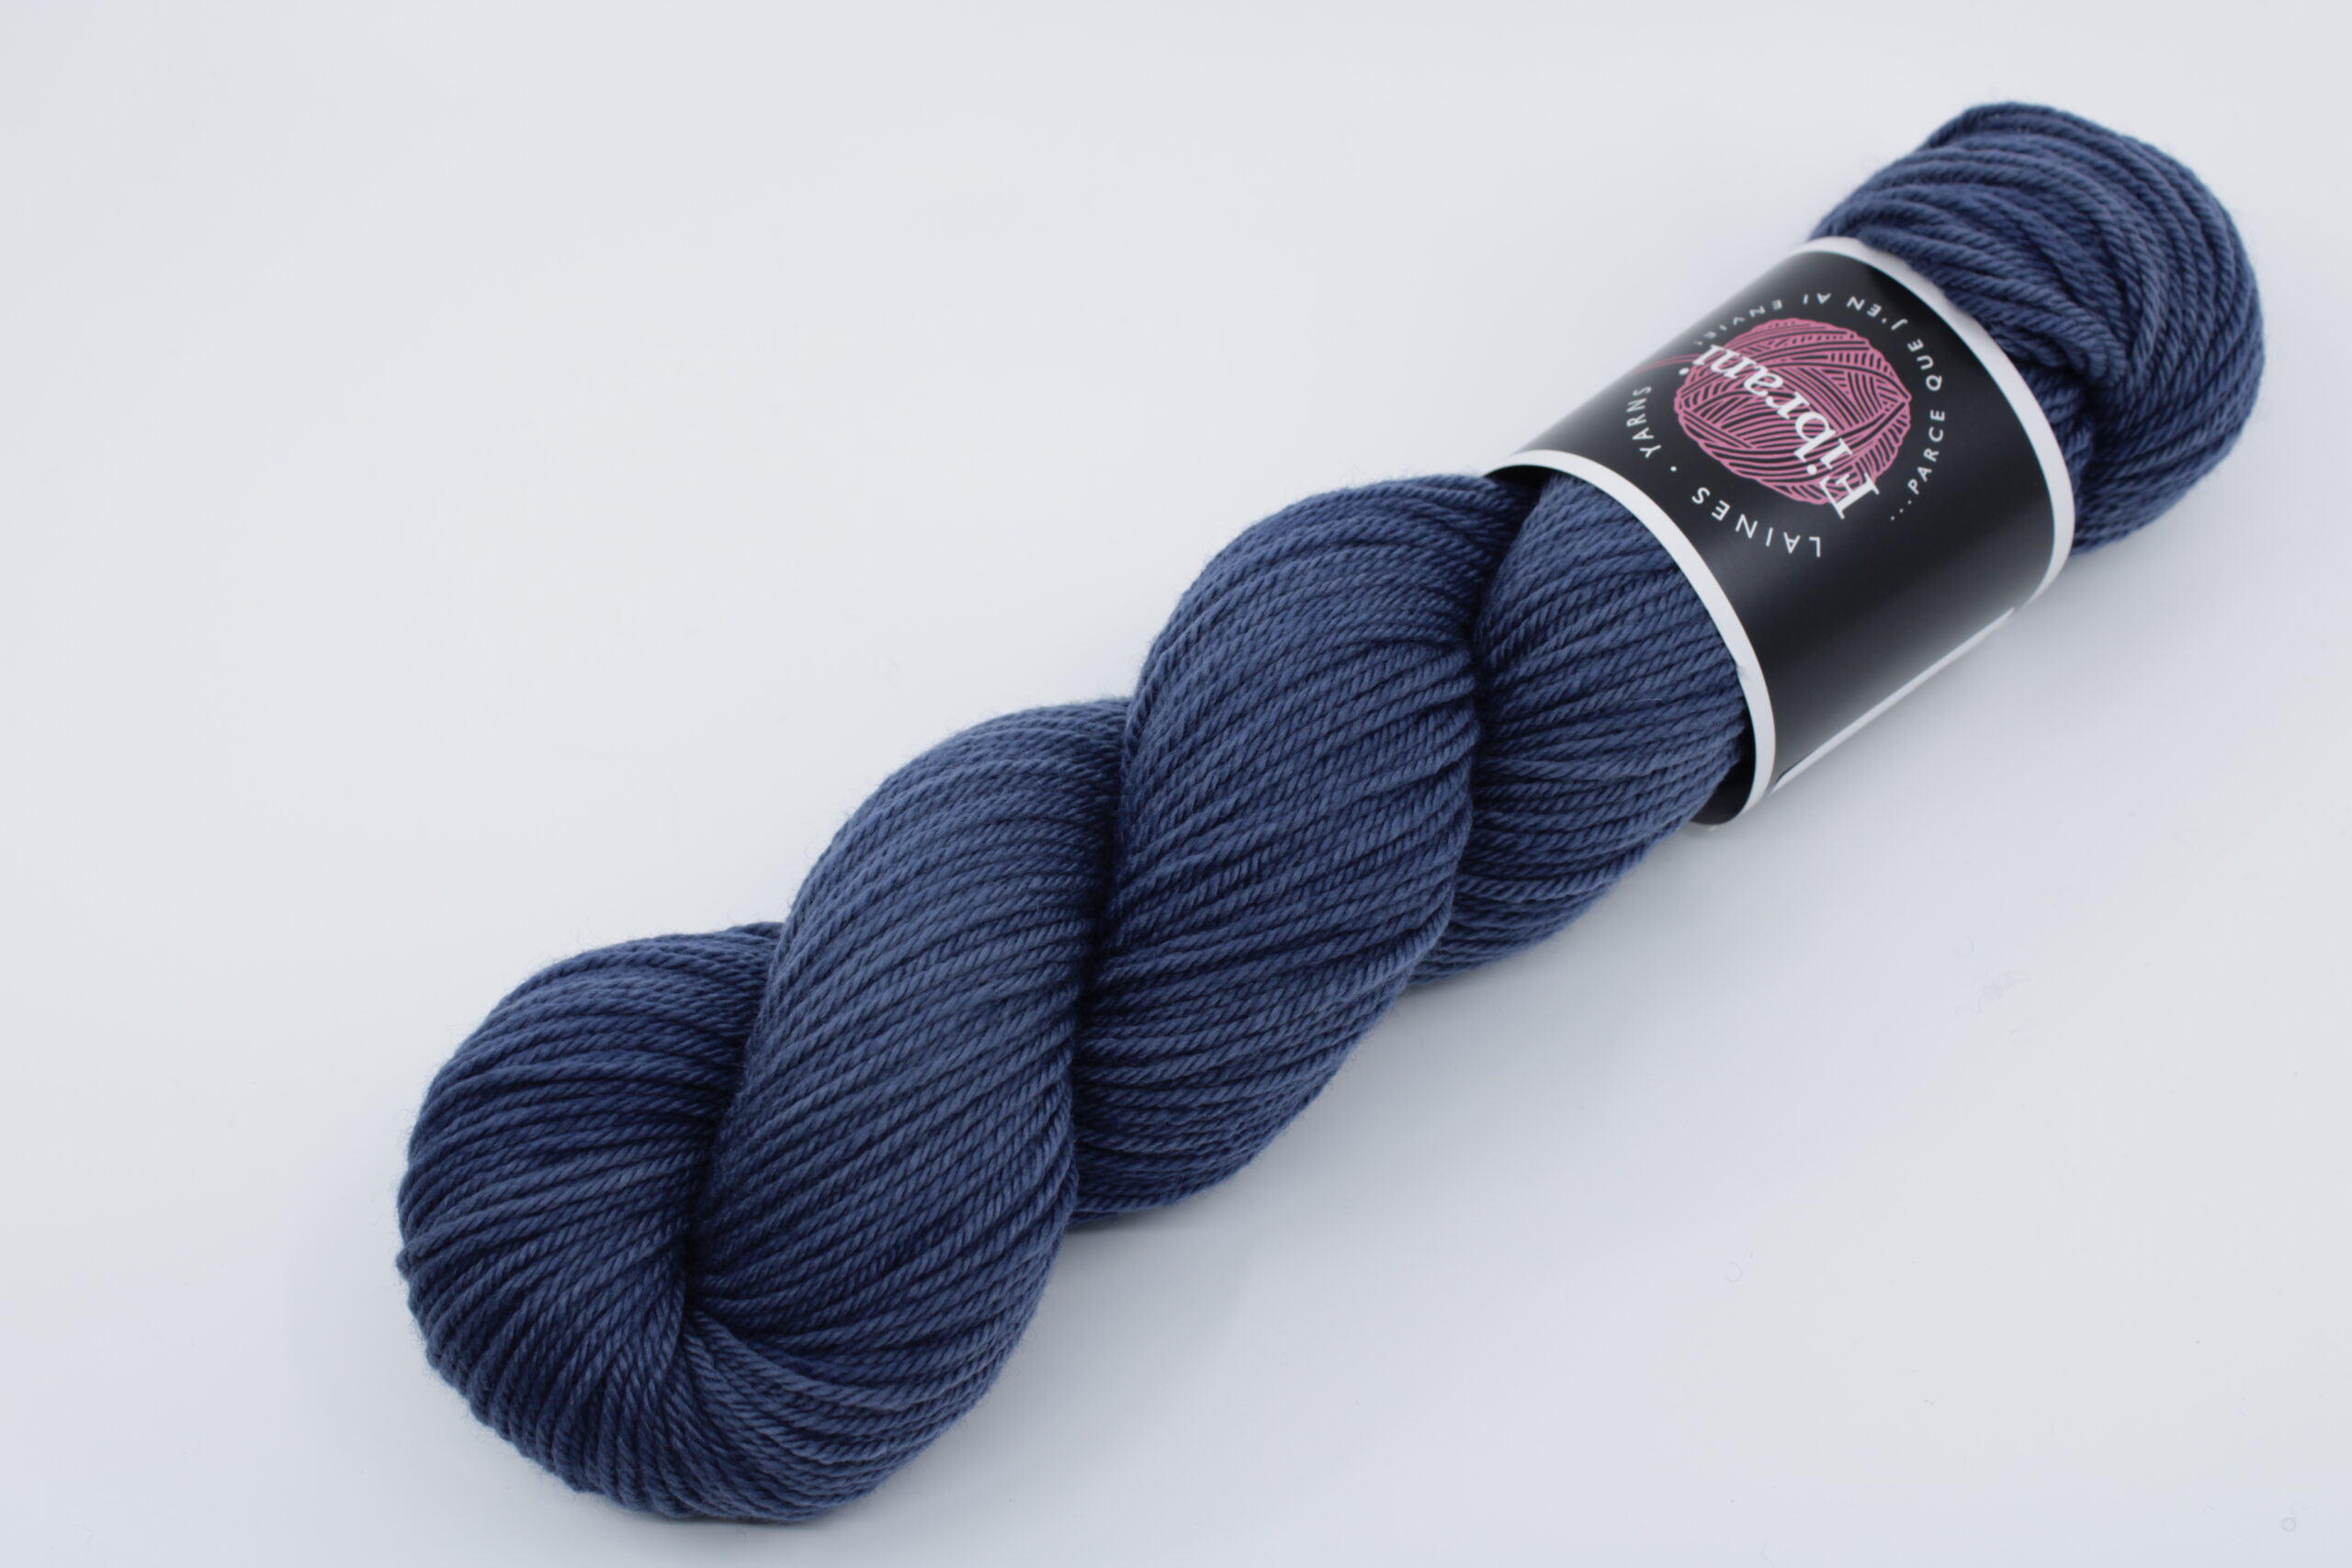 Folcon worsted base. Wool 100% untreated merino. Trio of colors: blue. Color: Dylan.